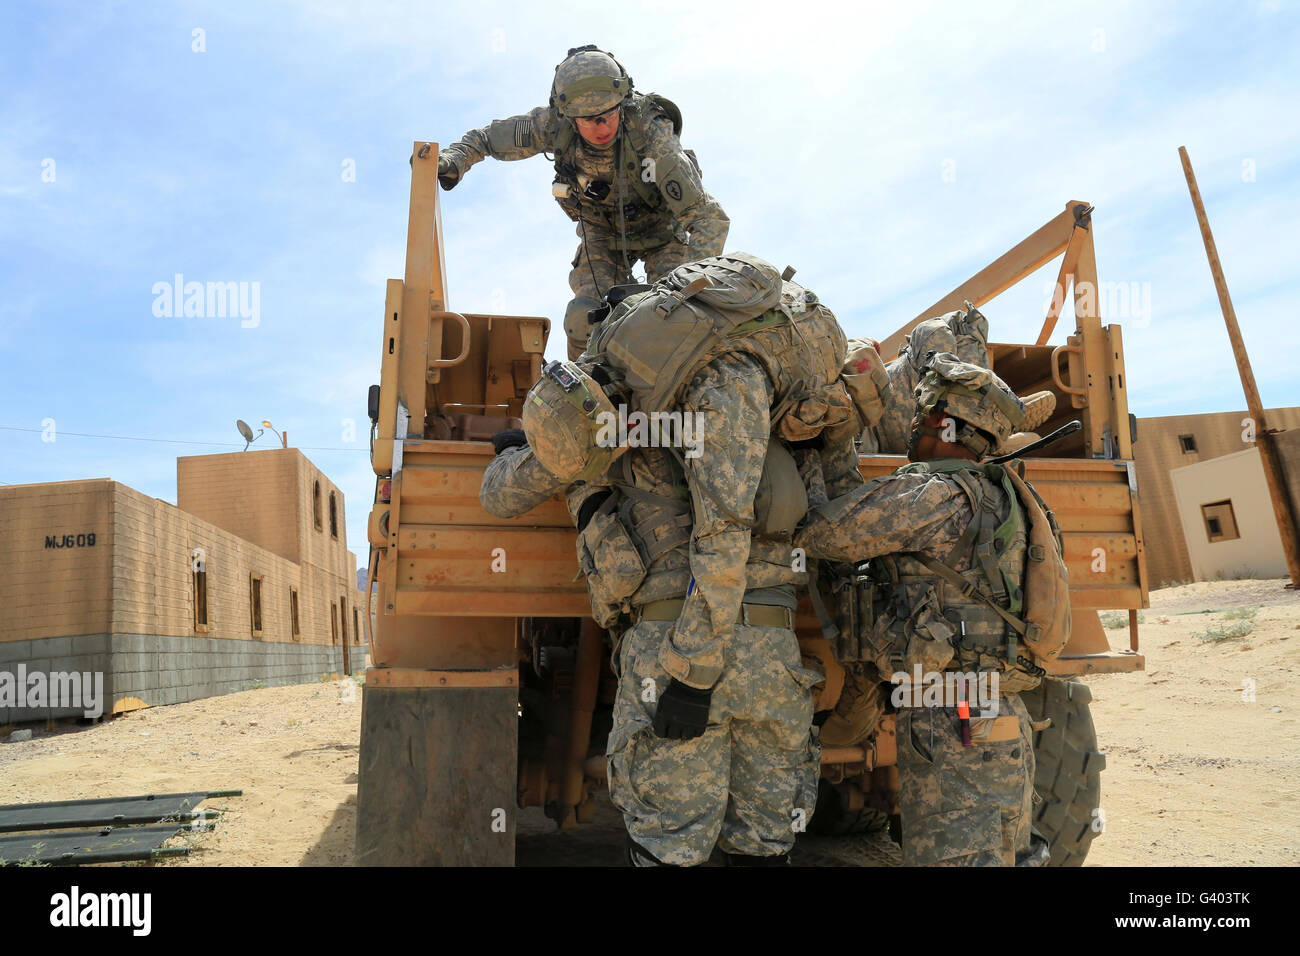 U.S. Army Soldiers lift a simulated casualty. Stock Photo